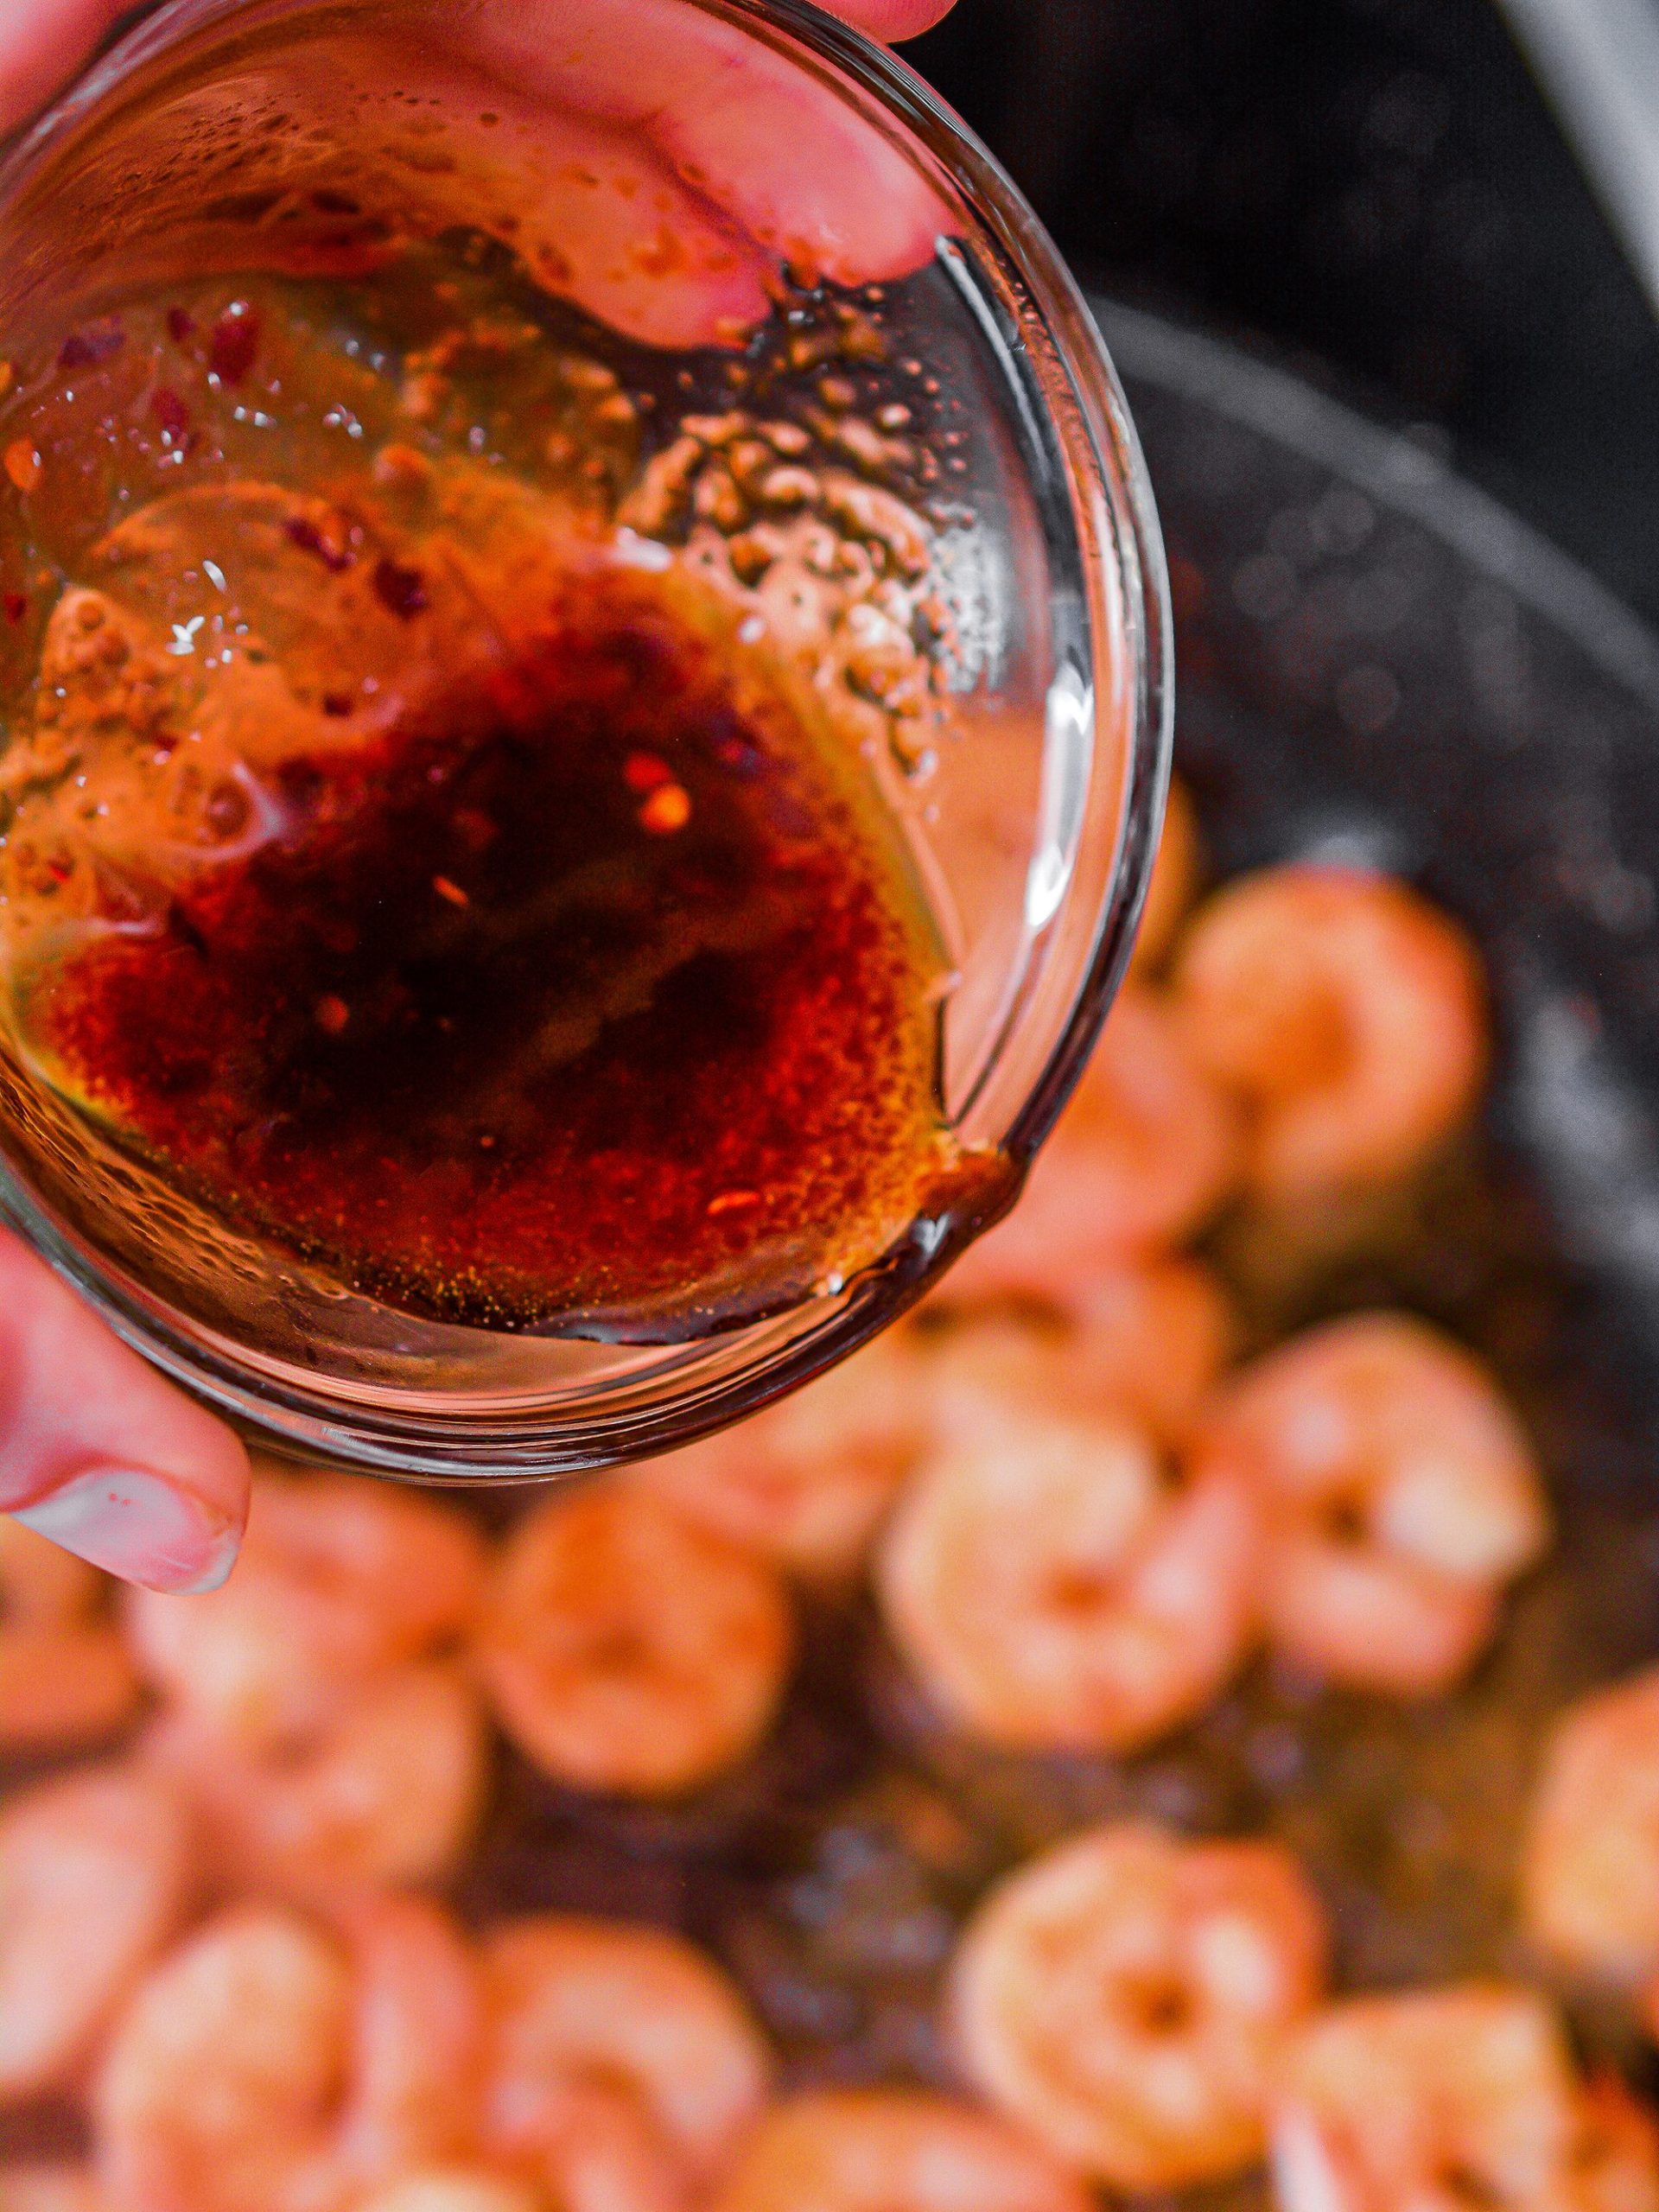 Pour the sauce mixture over the shrimp and saute for 2 minutes longer.